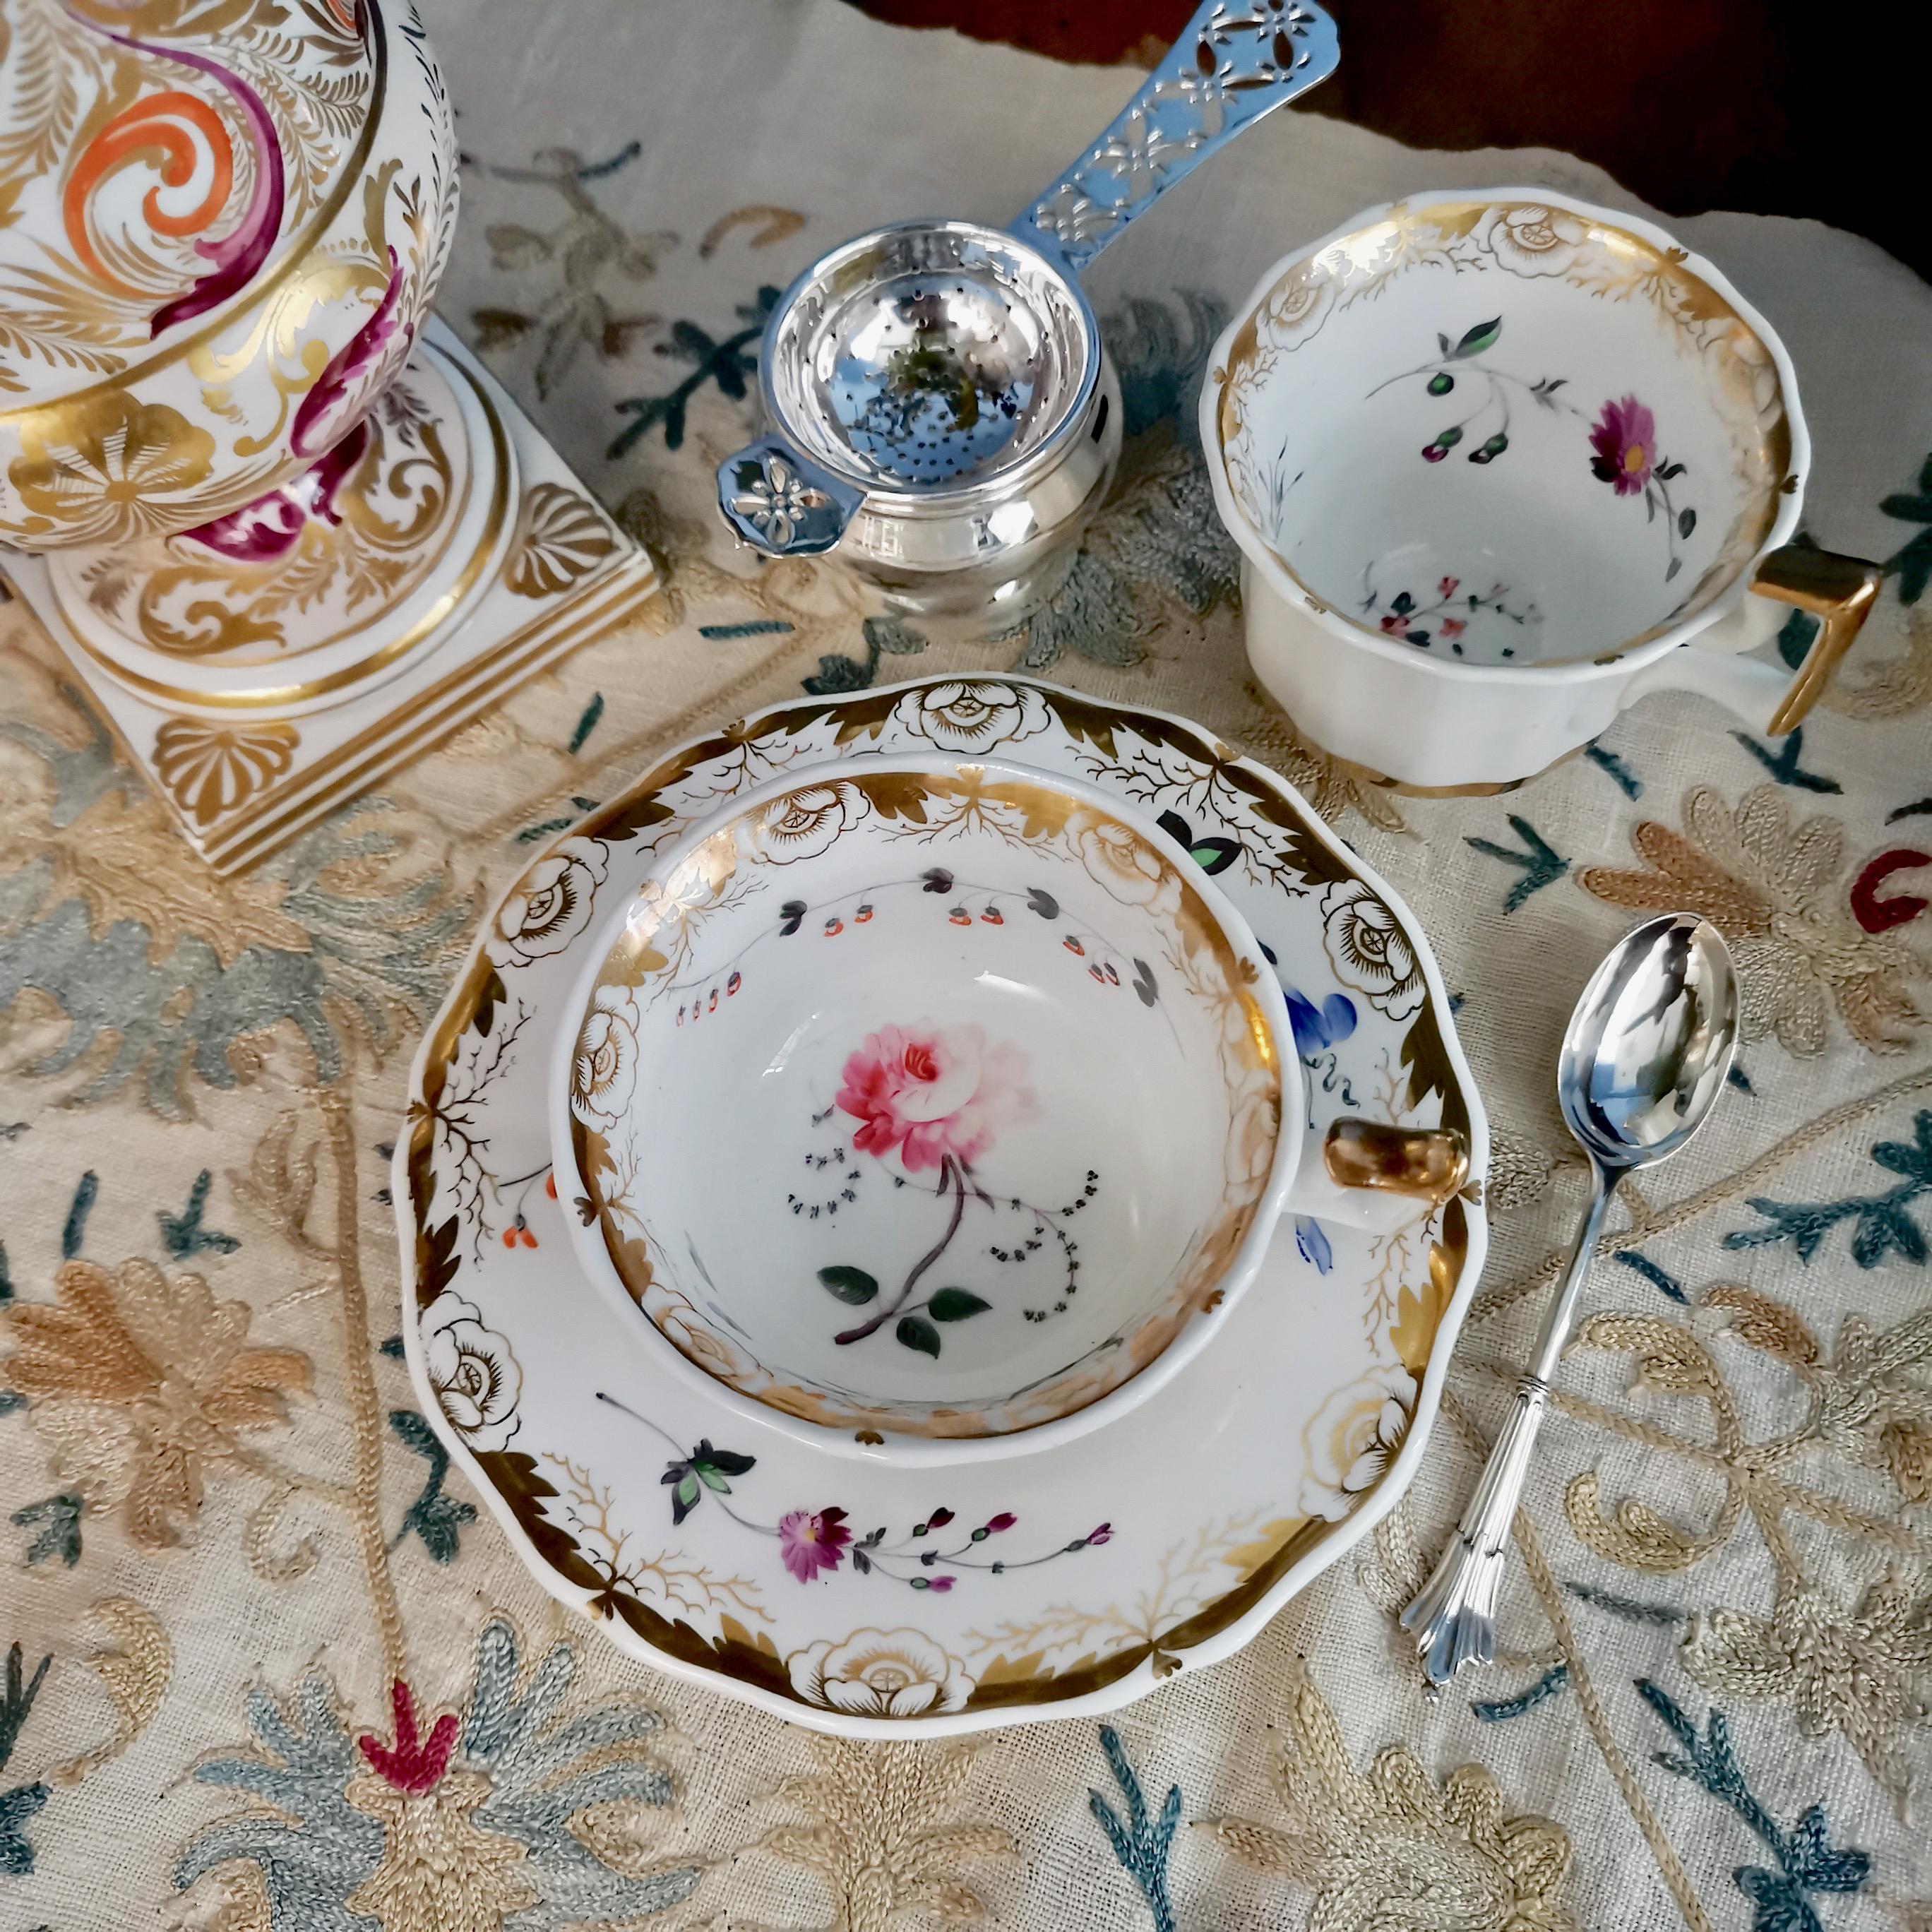 This is a beautiful trio consisting of a teacup, a coffee cup and a saucer, made by a Staffordshire factory sometime between 1825 and 1830. The set could possibly have been being made by Ridgway, Davenport or Yates, but we have not been able to